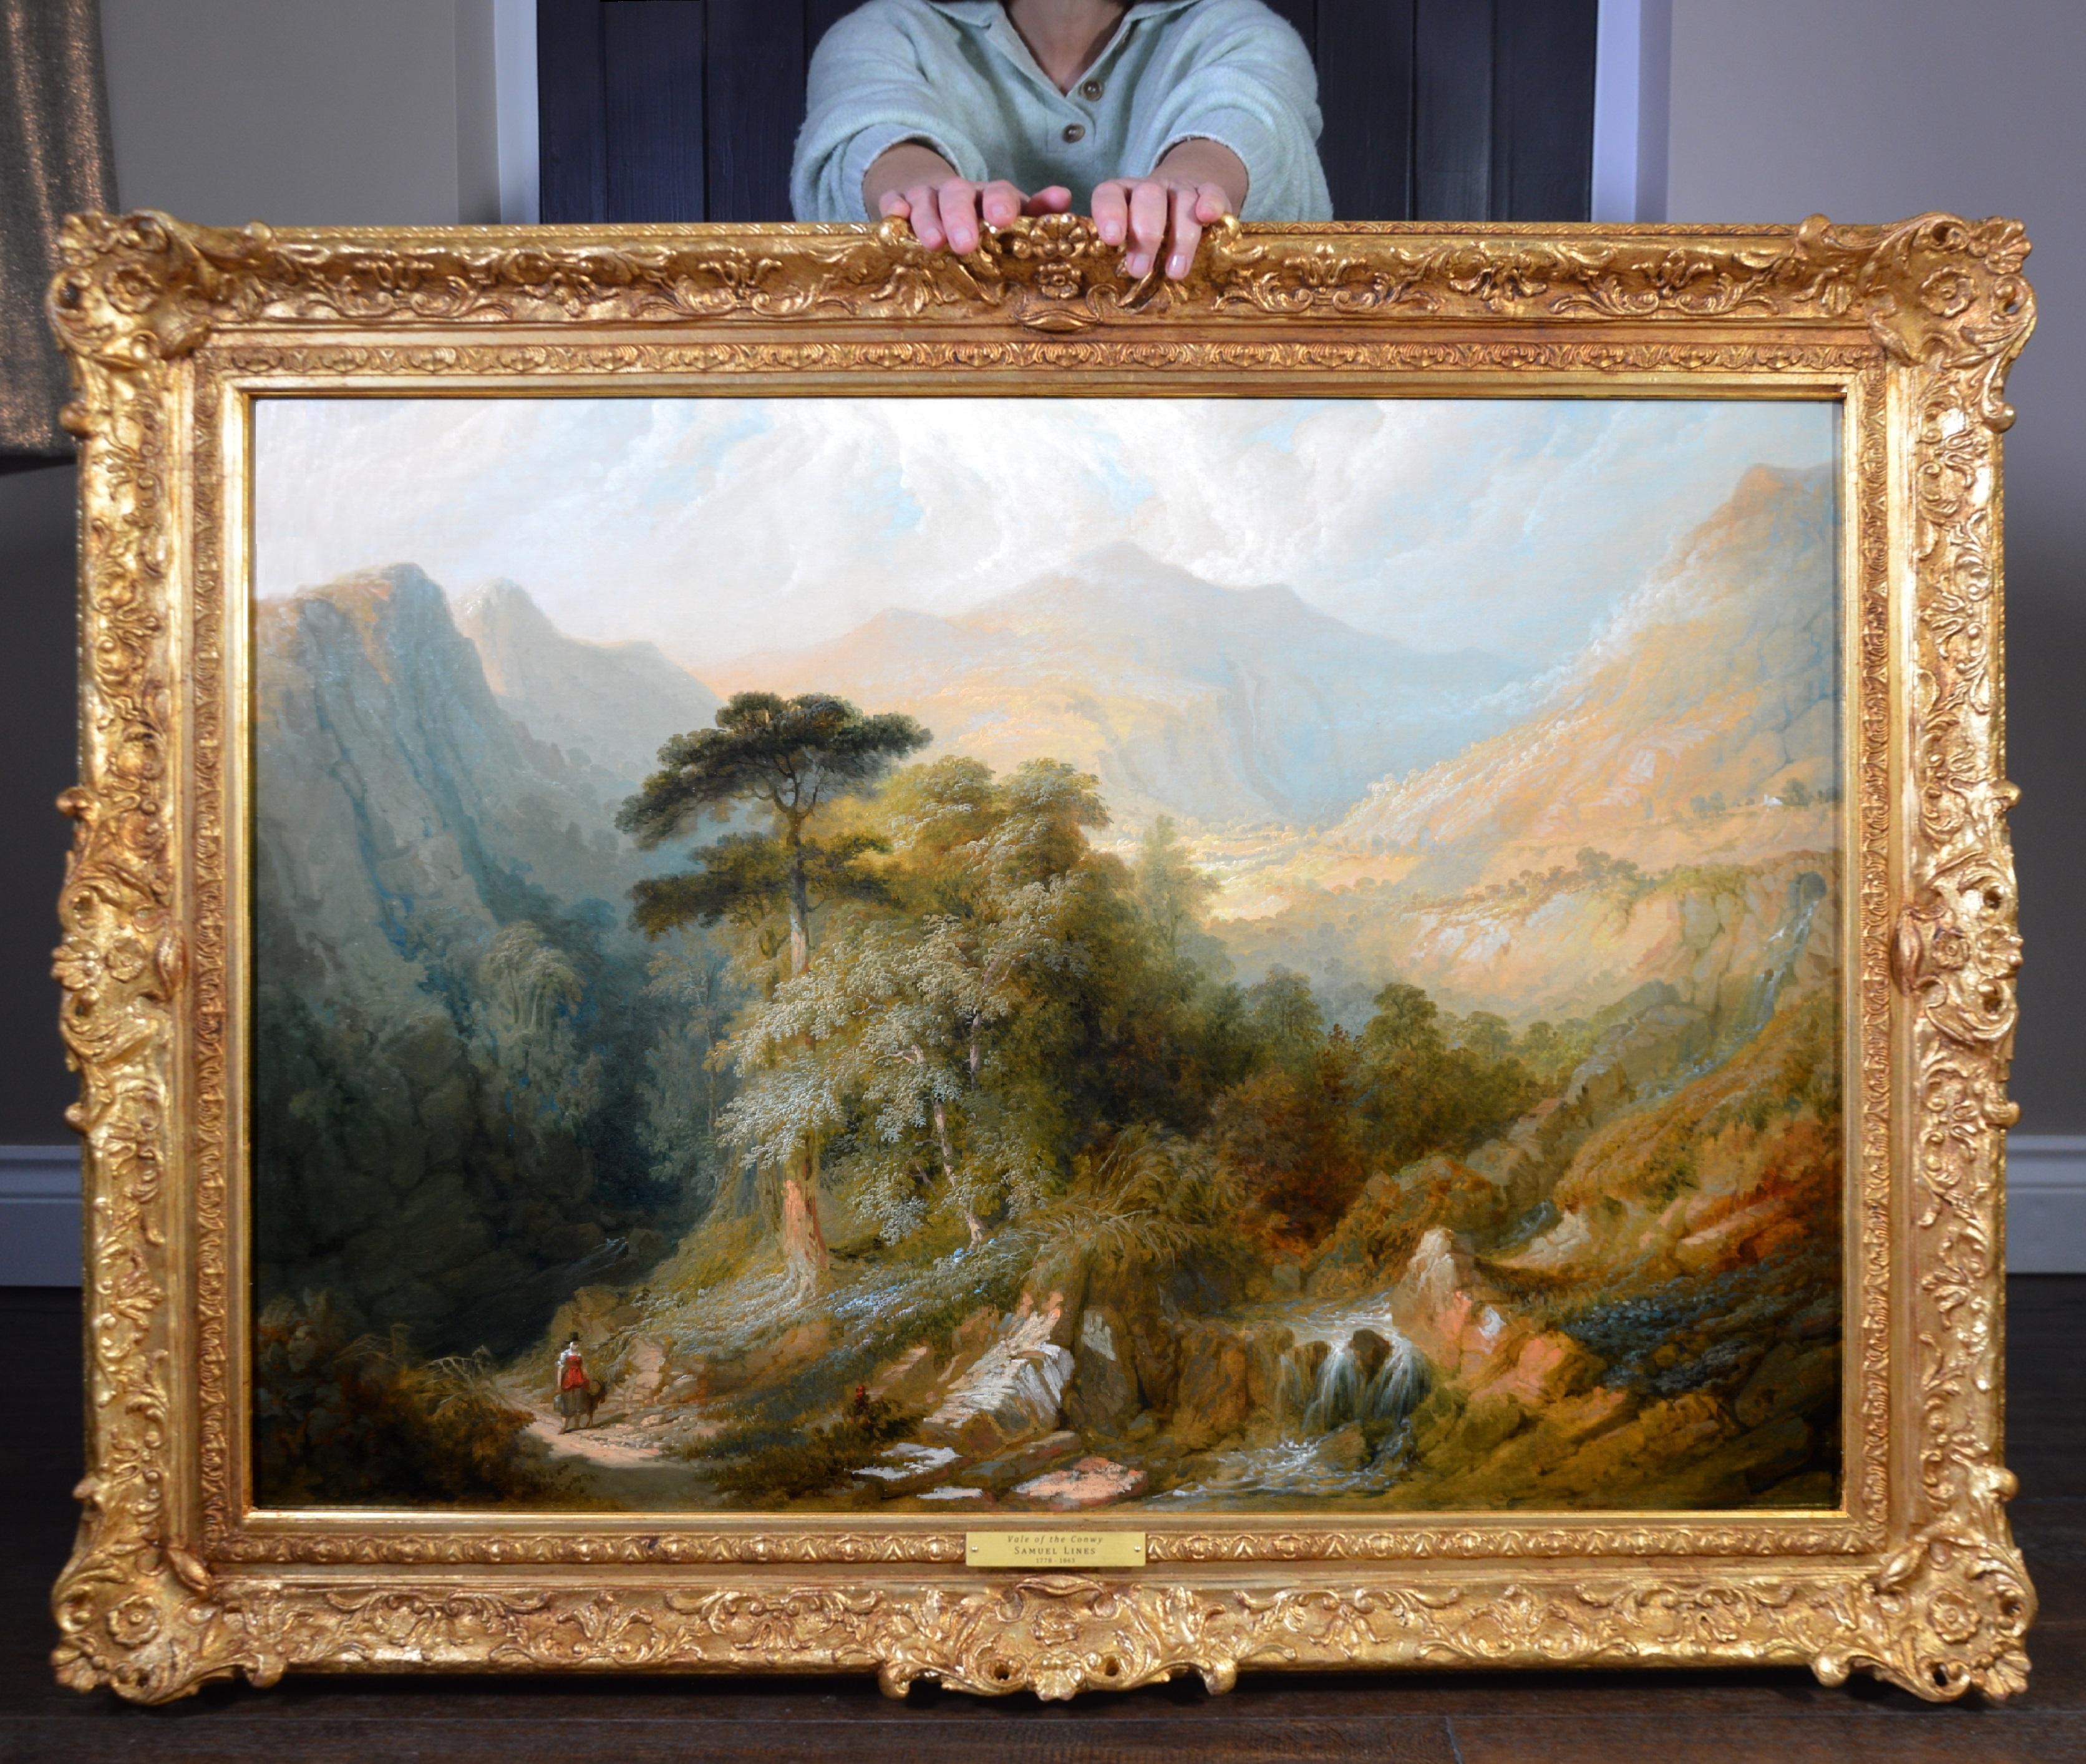 Samuel Lines Figurative Painting - Vale of the Conwy, Snowdonia - Large 19th Century Landscape Oil Painting Wales 